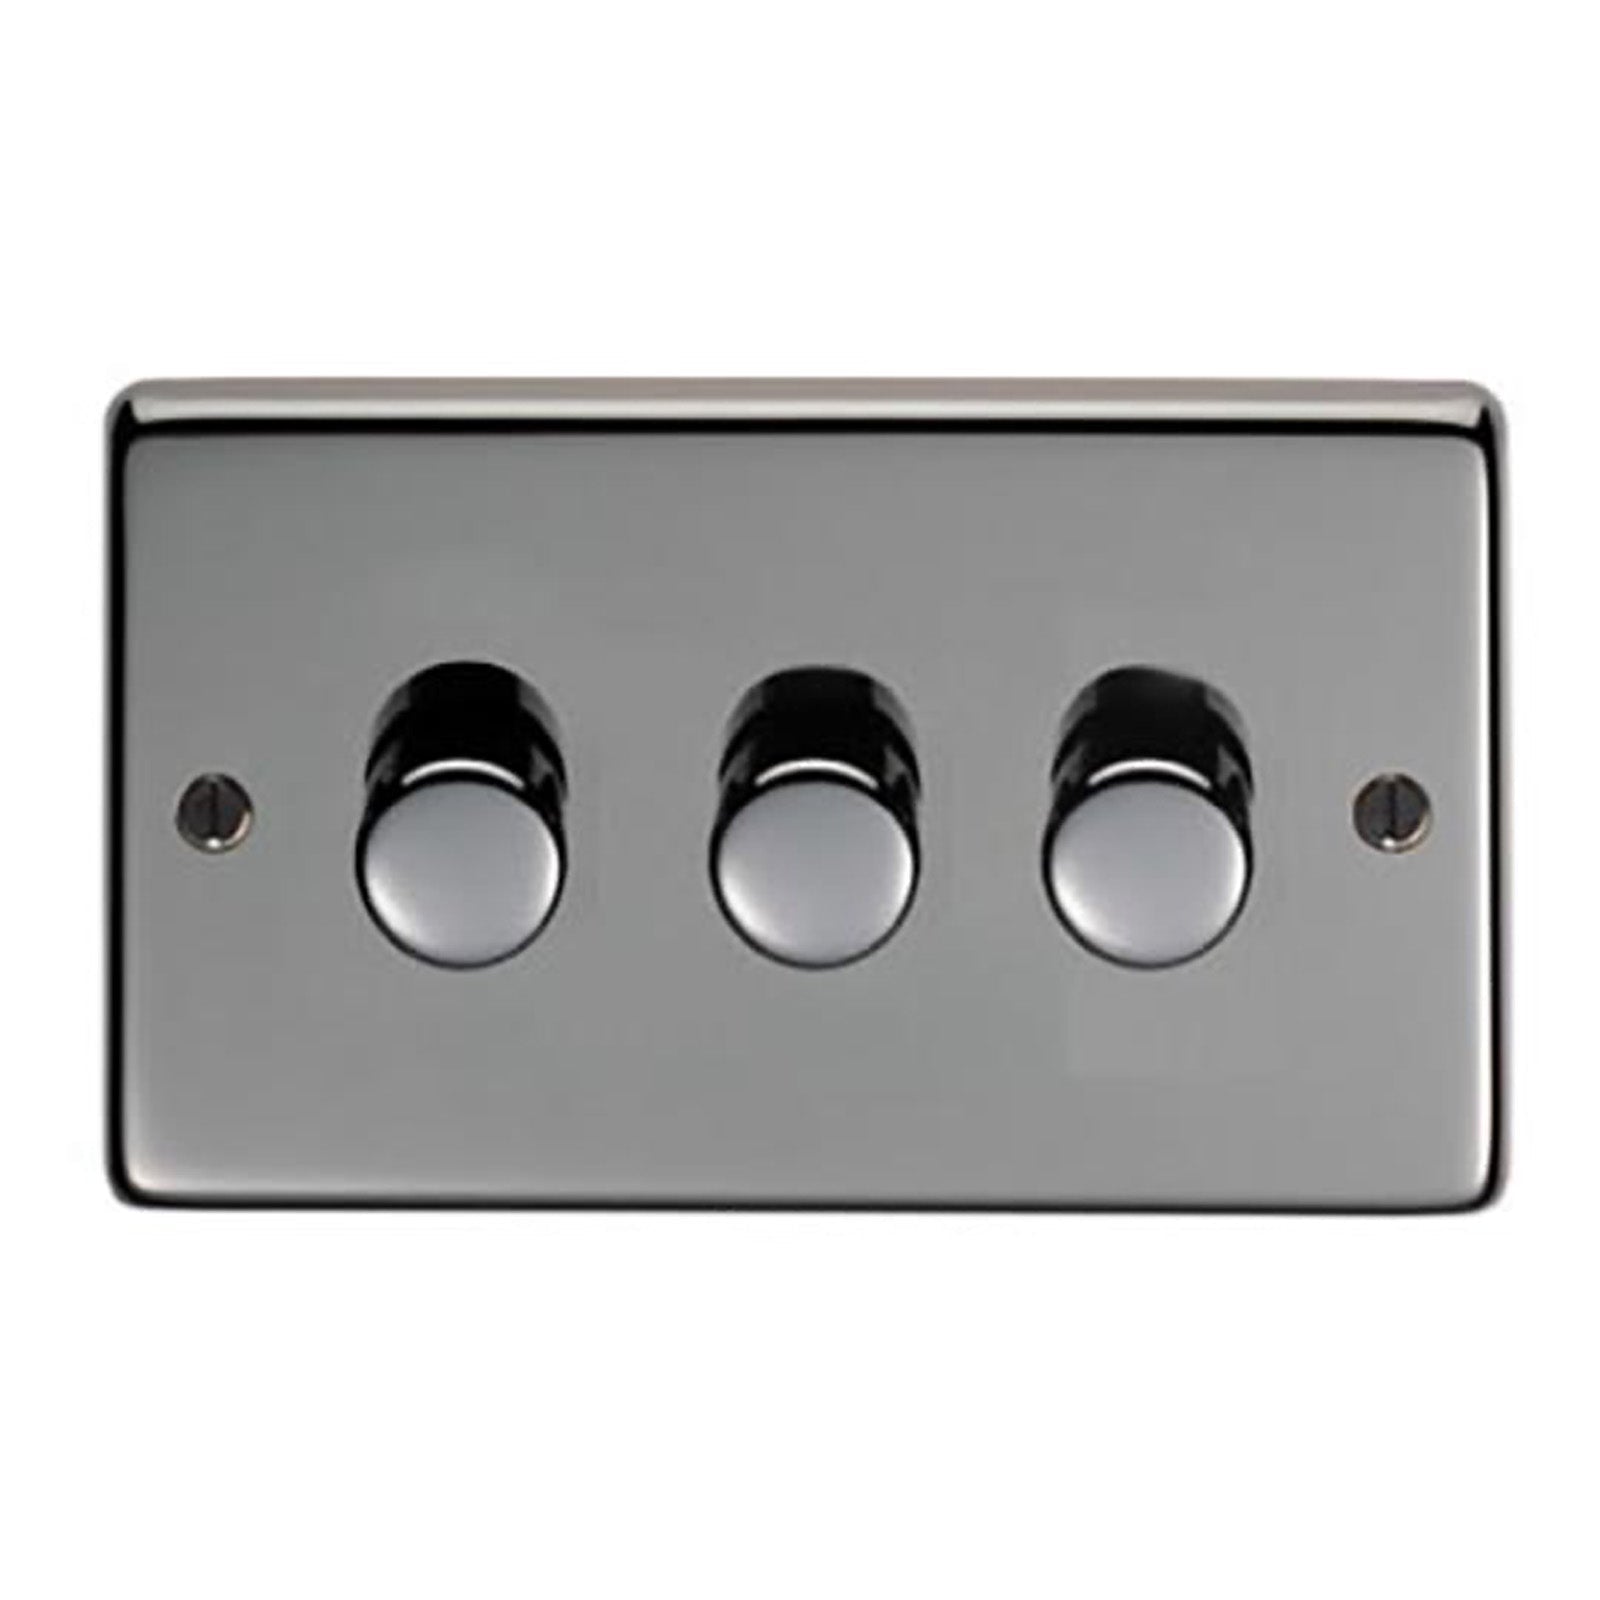 SHOW Image of Triple LED Dimmer Switch with Black Nickel finish